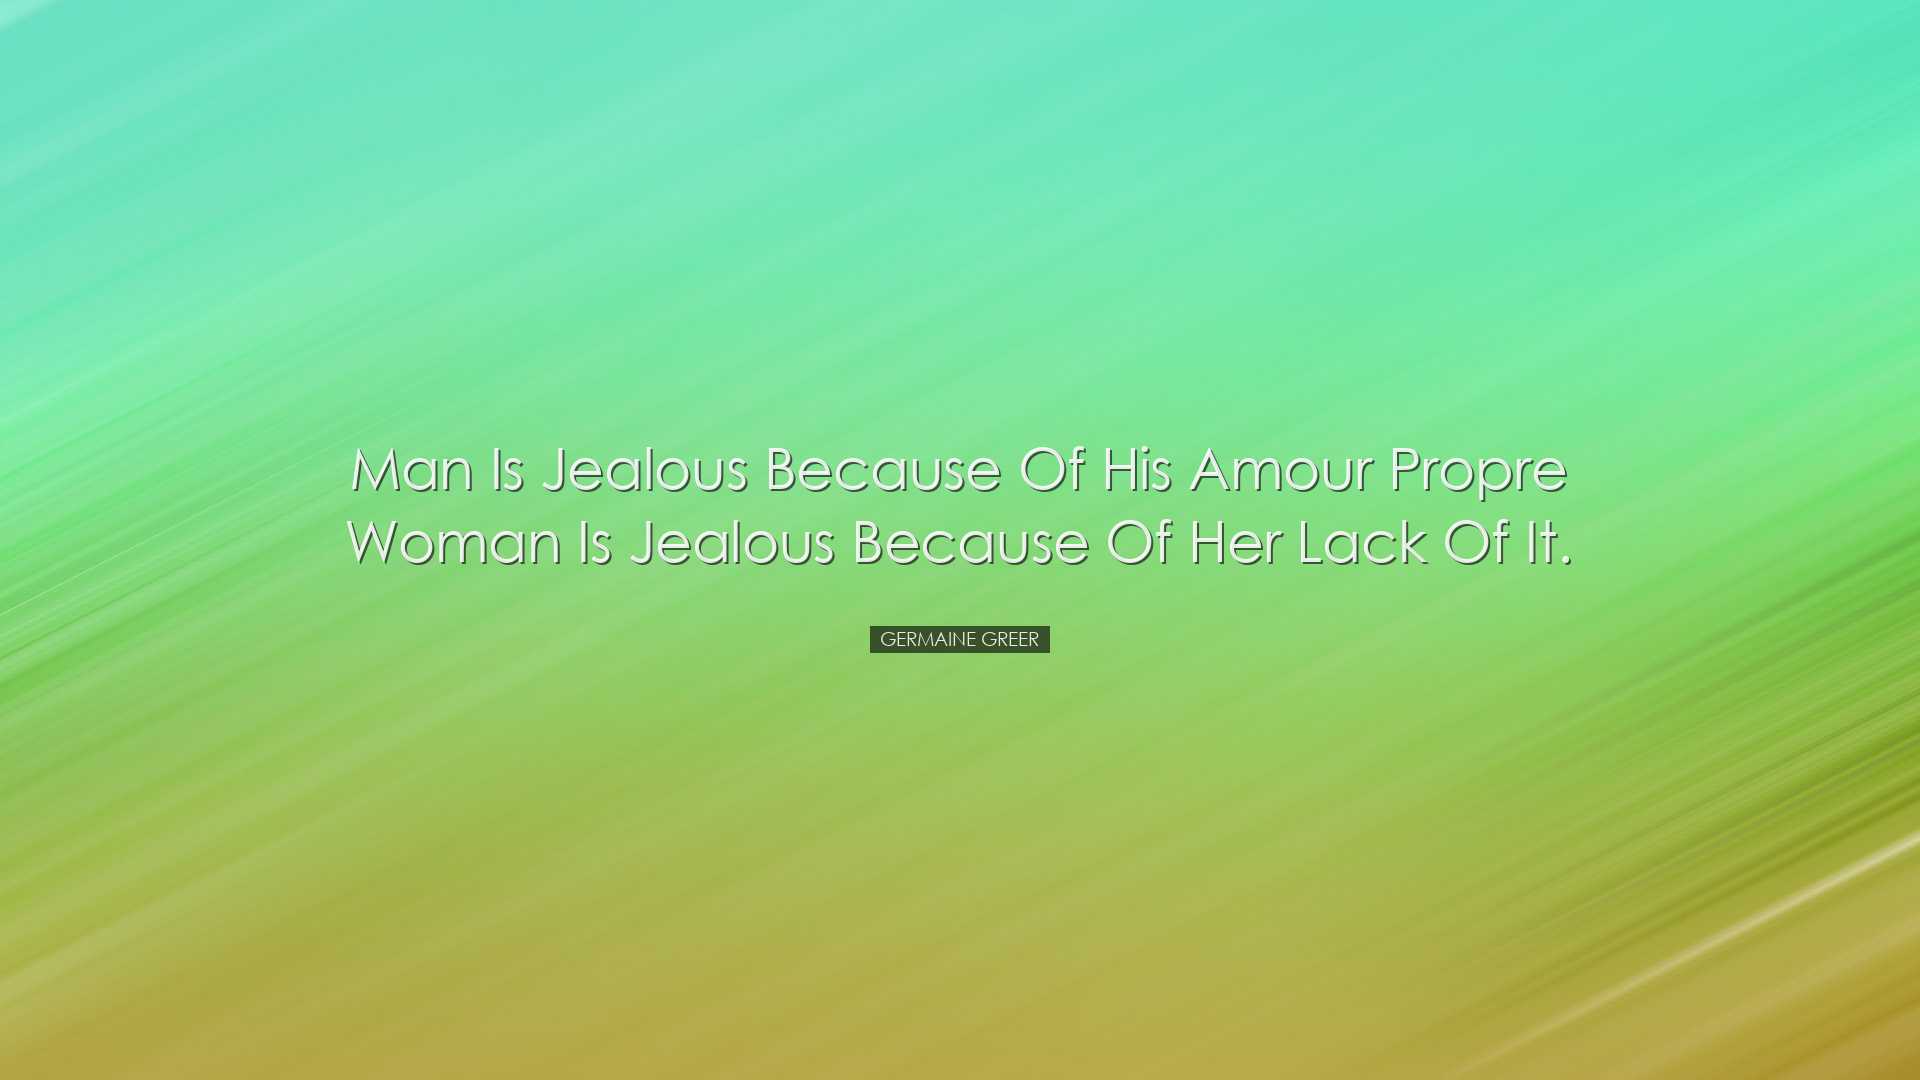 Man is jealous because of his amour propre woman is jealous becaus